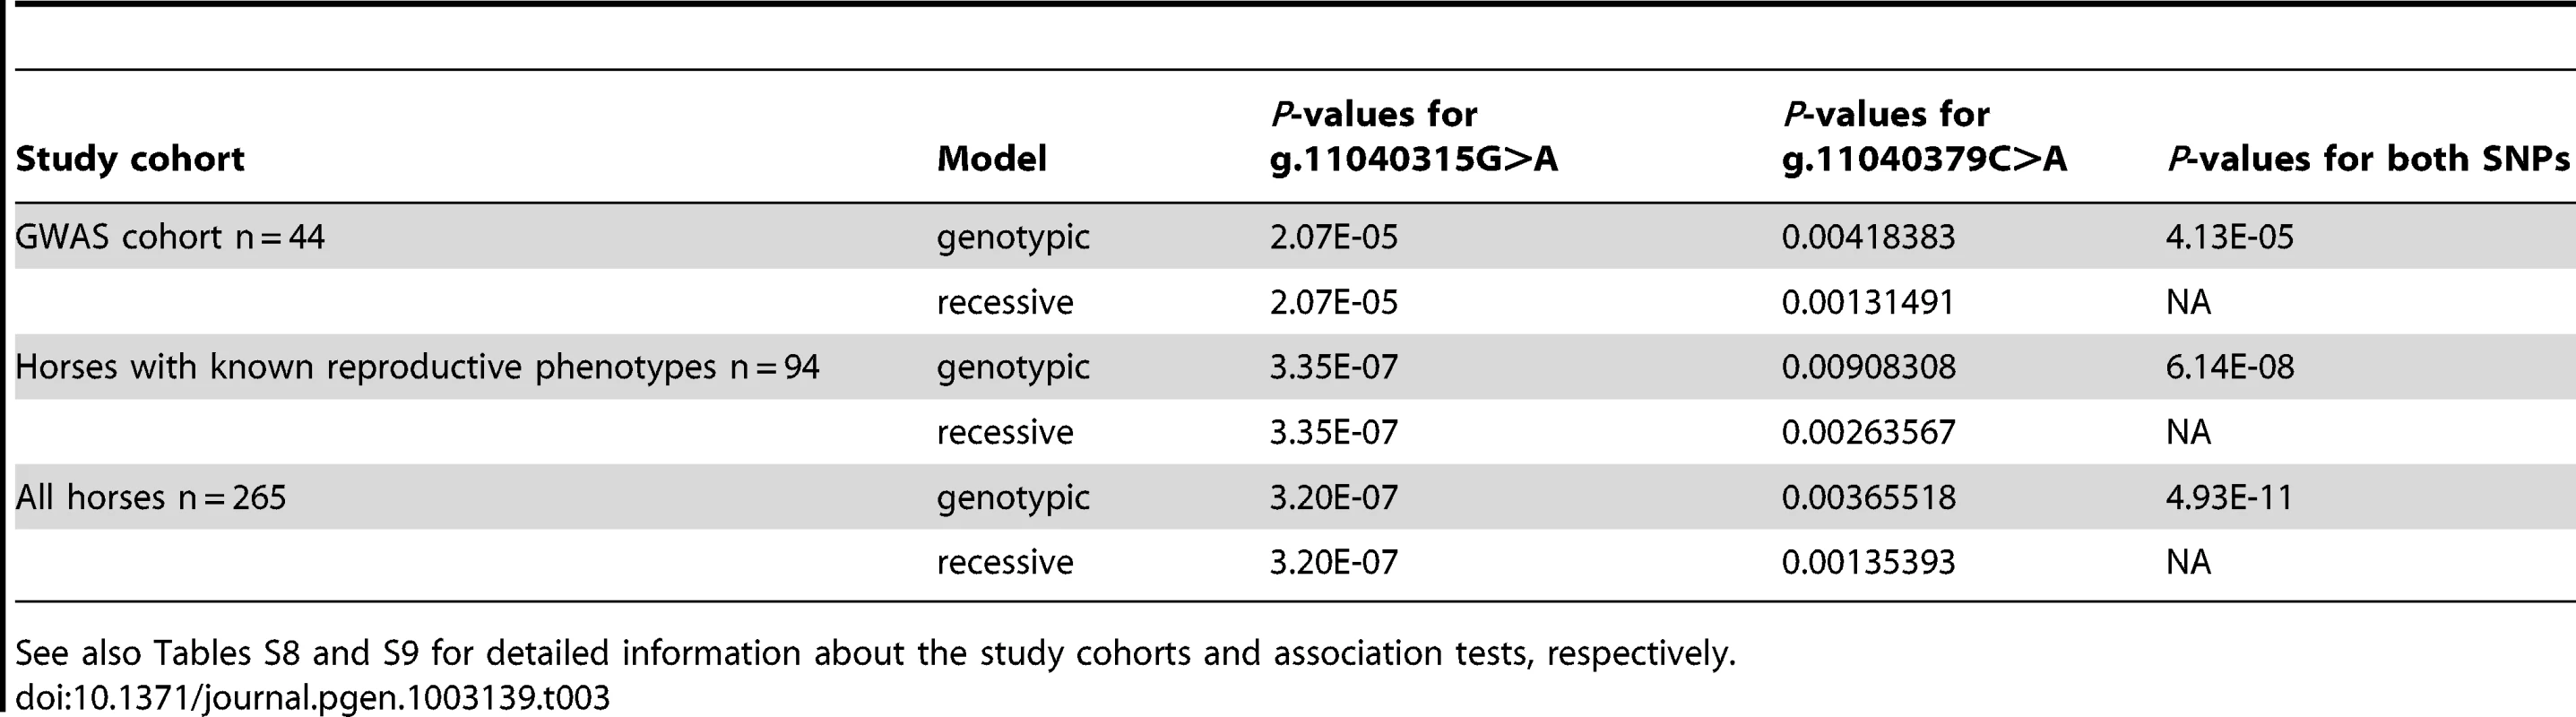 Association analysis of <i>FKBP6</i> exon 4 and the IAR phenotype in three different study cohorts using Fisher's exact test over genotypic and recessive coding.